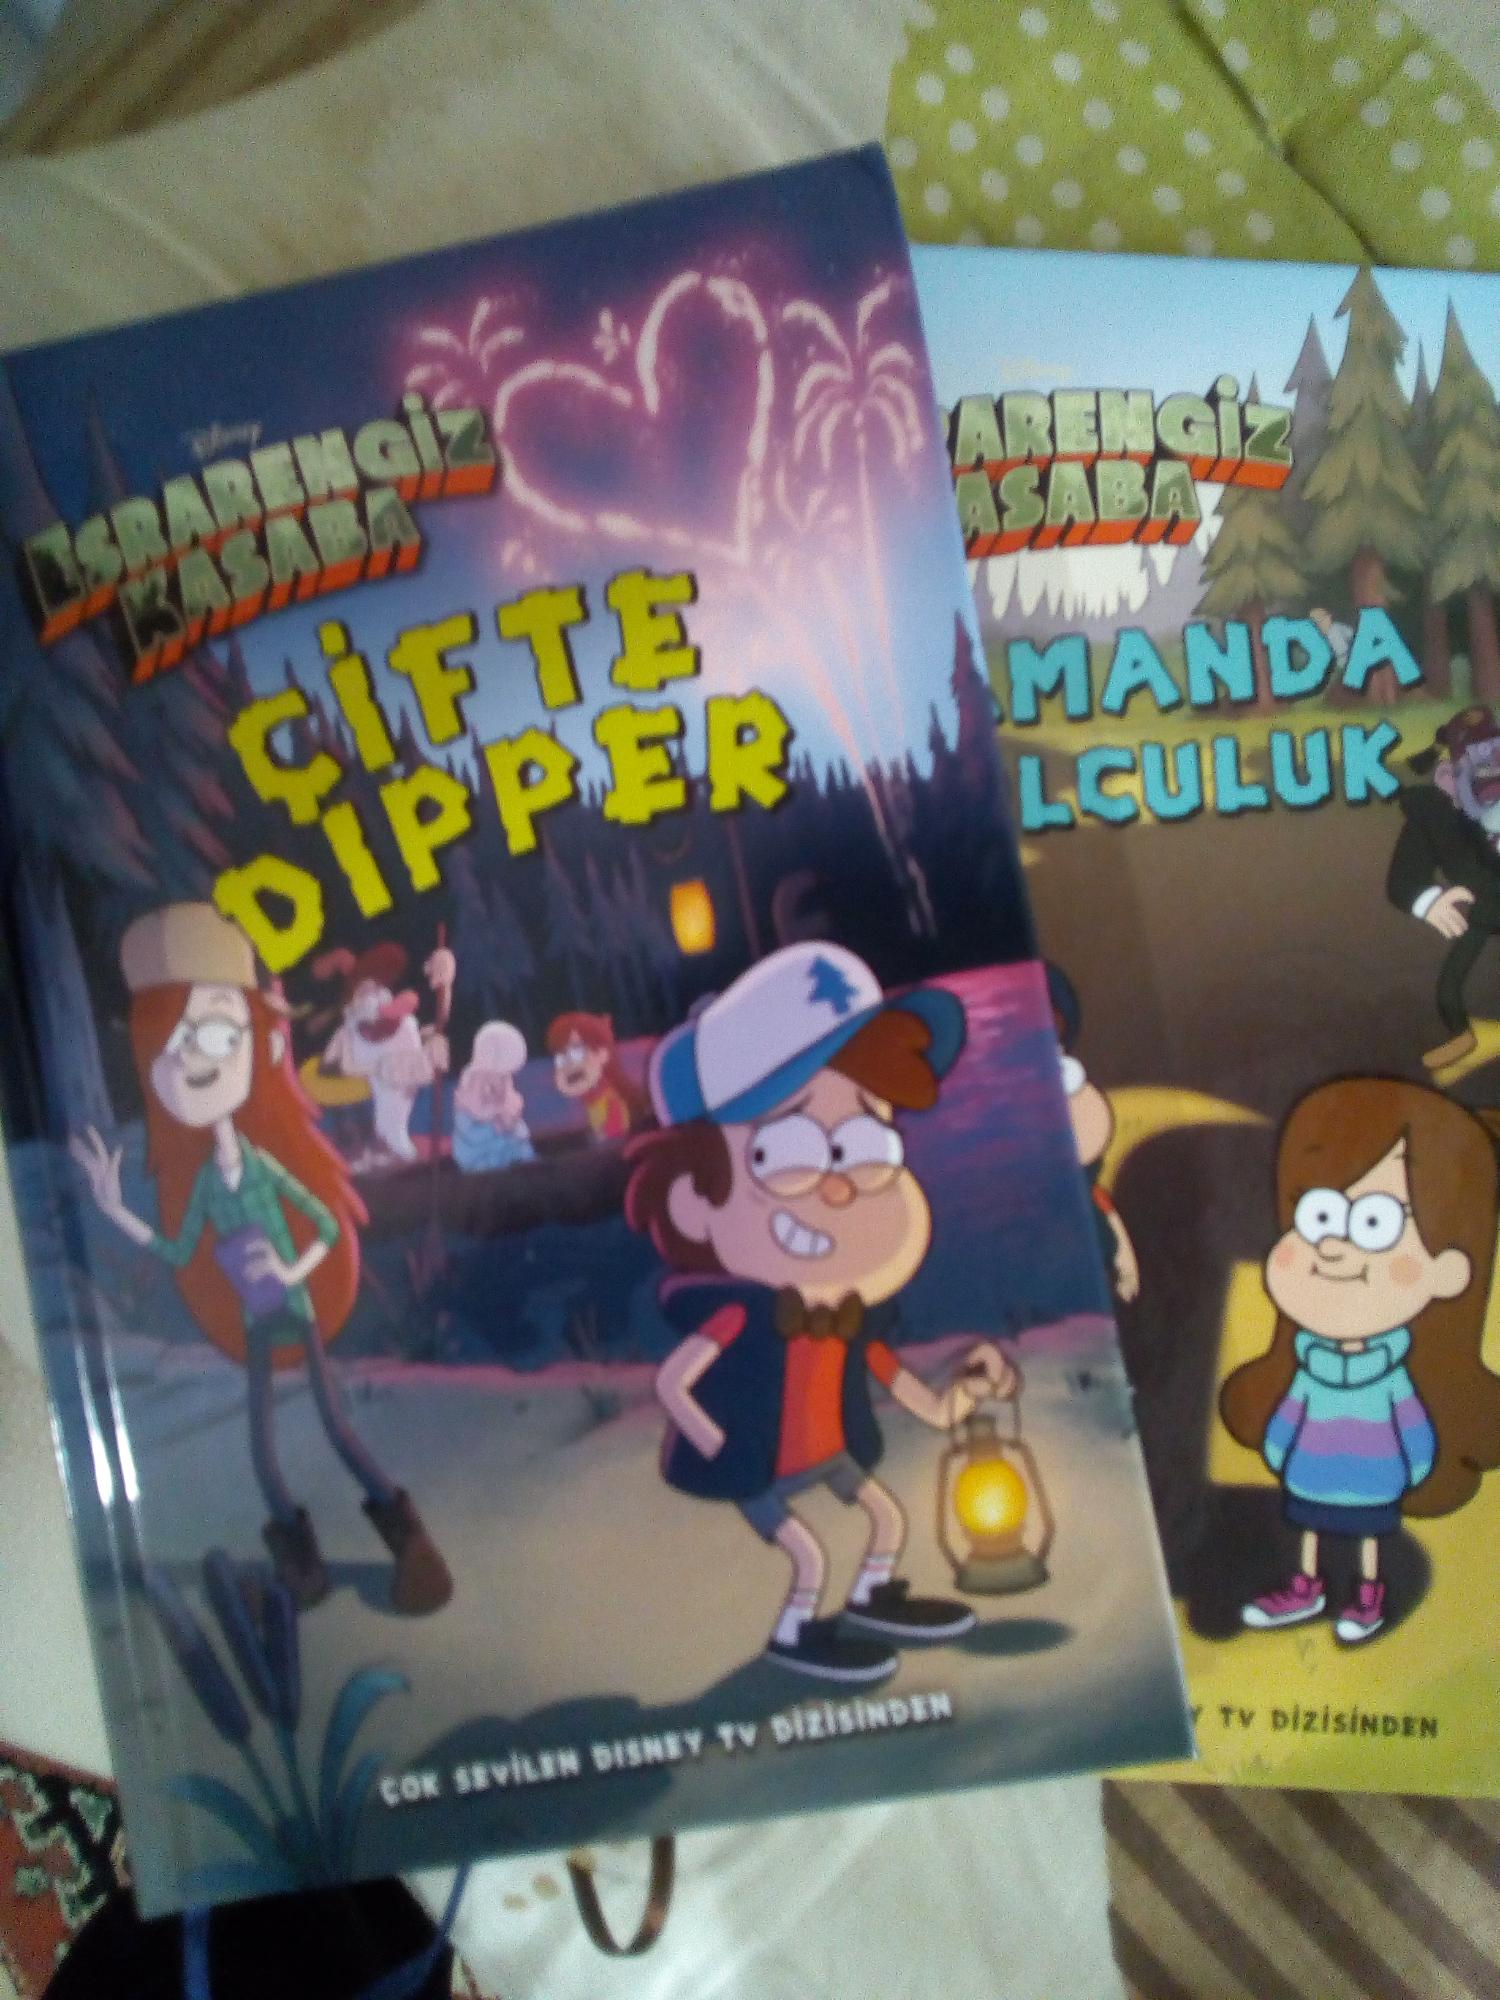 Bought these two Gravity Falls books ) Fandom